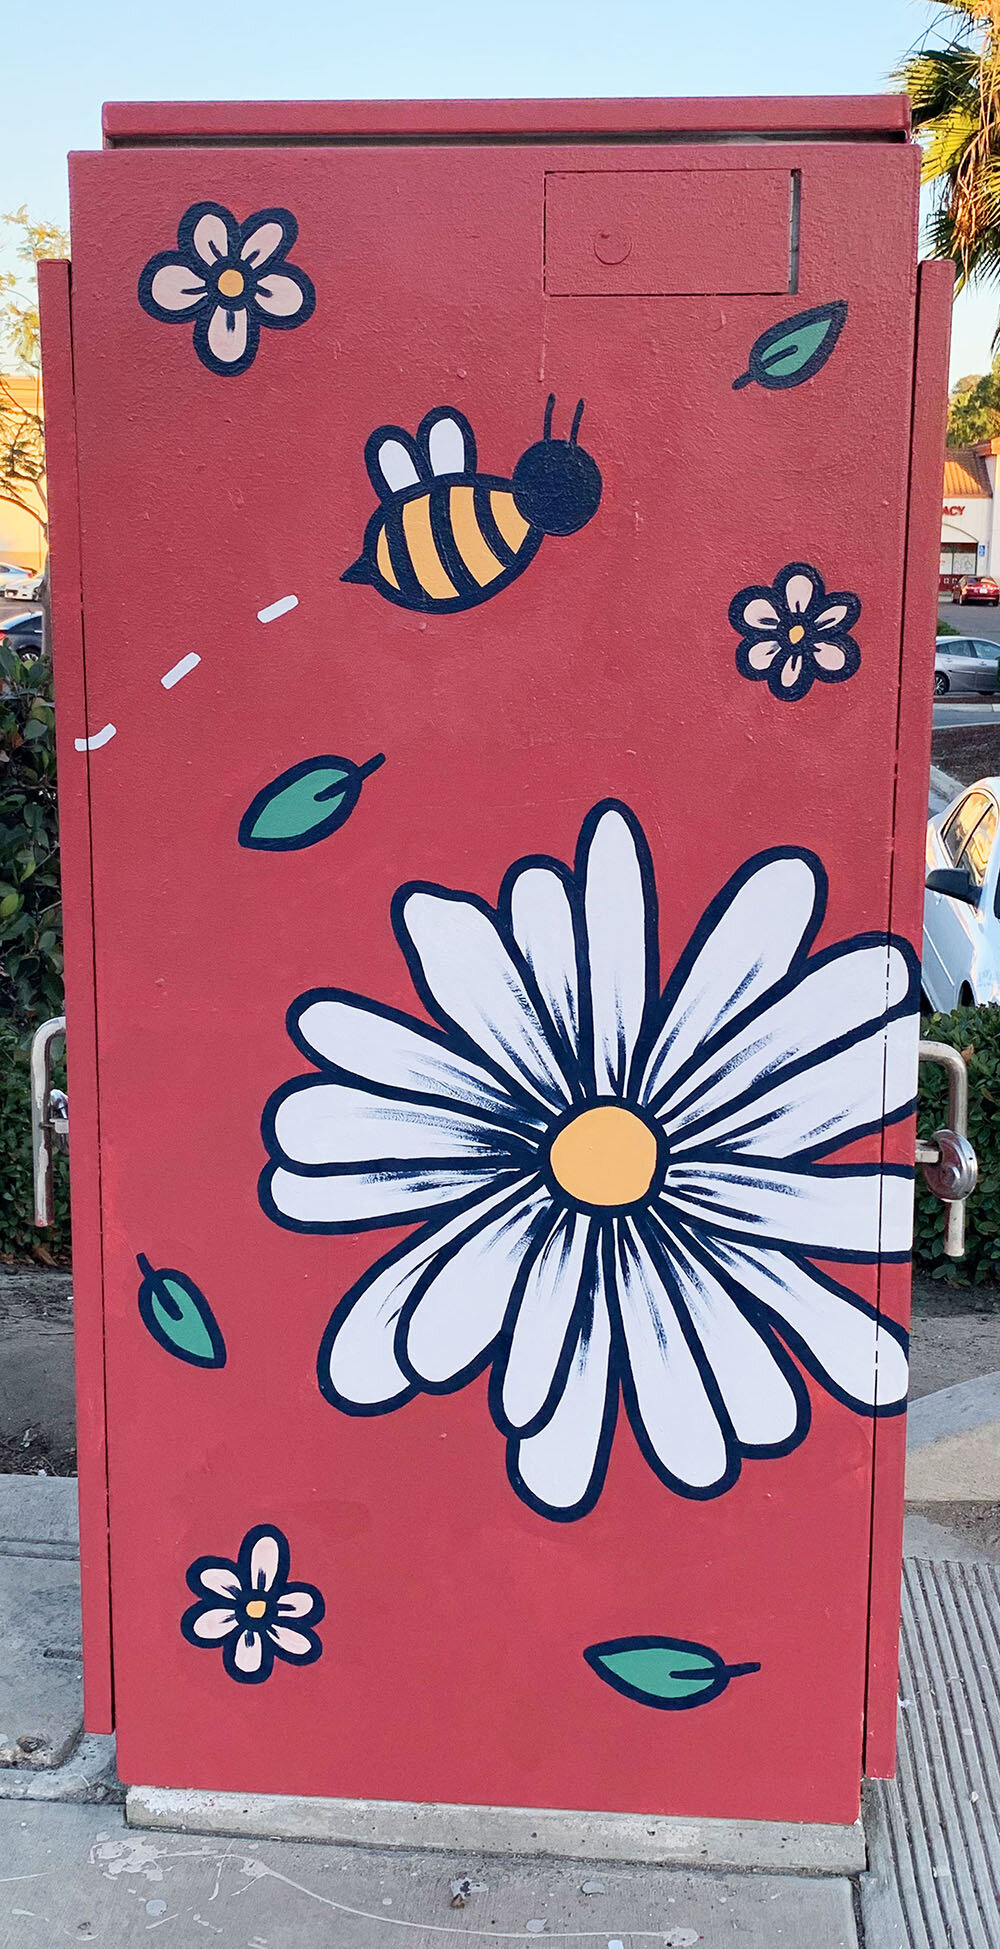 6 Local Artists Designing Utility Box Murals in San Diego